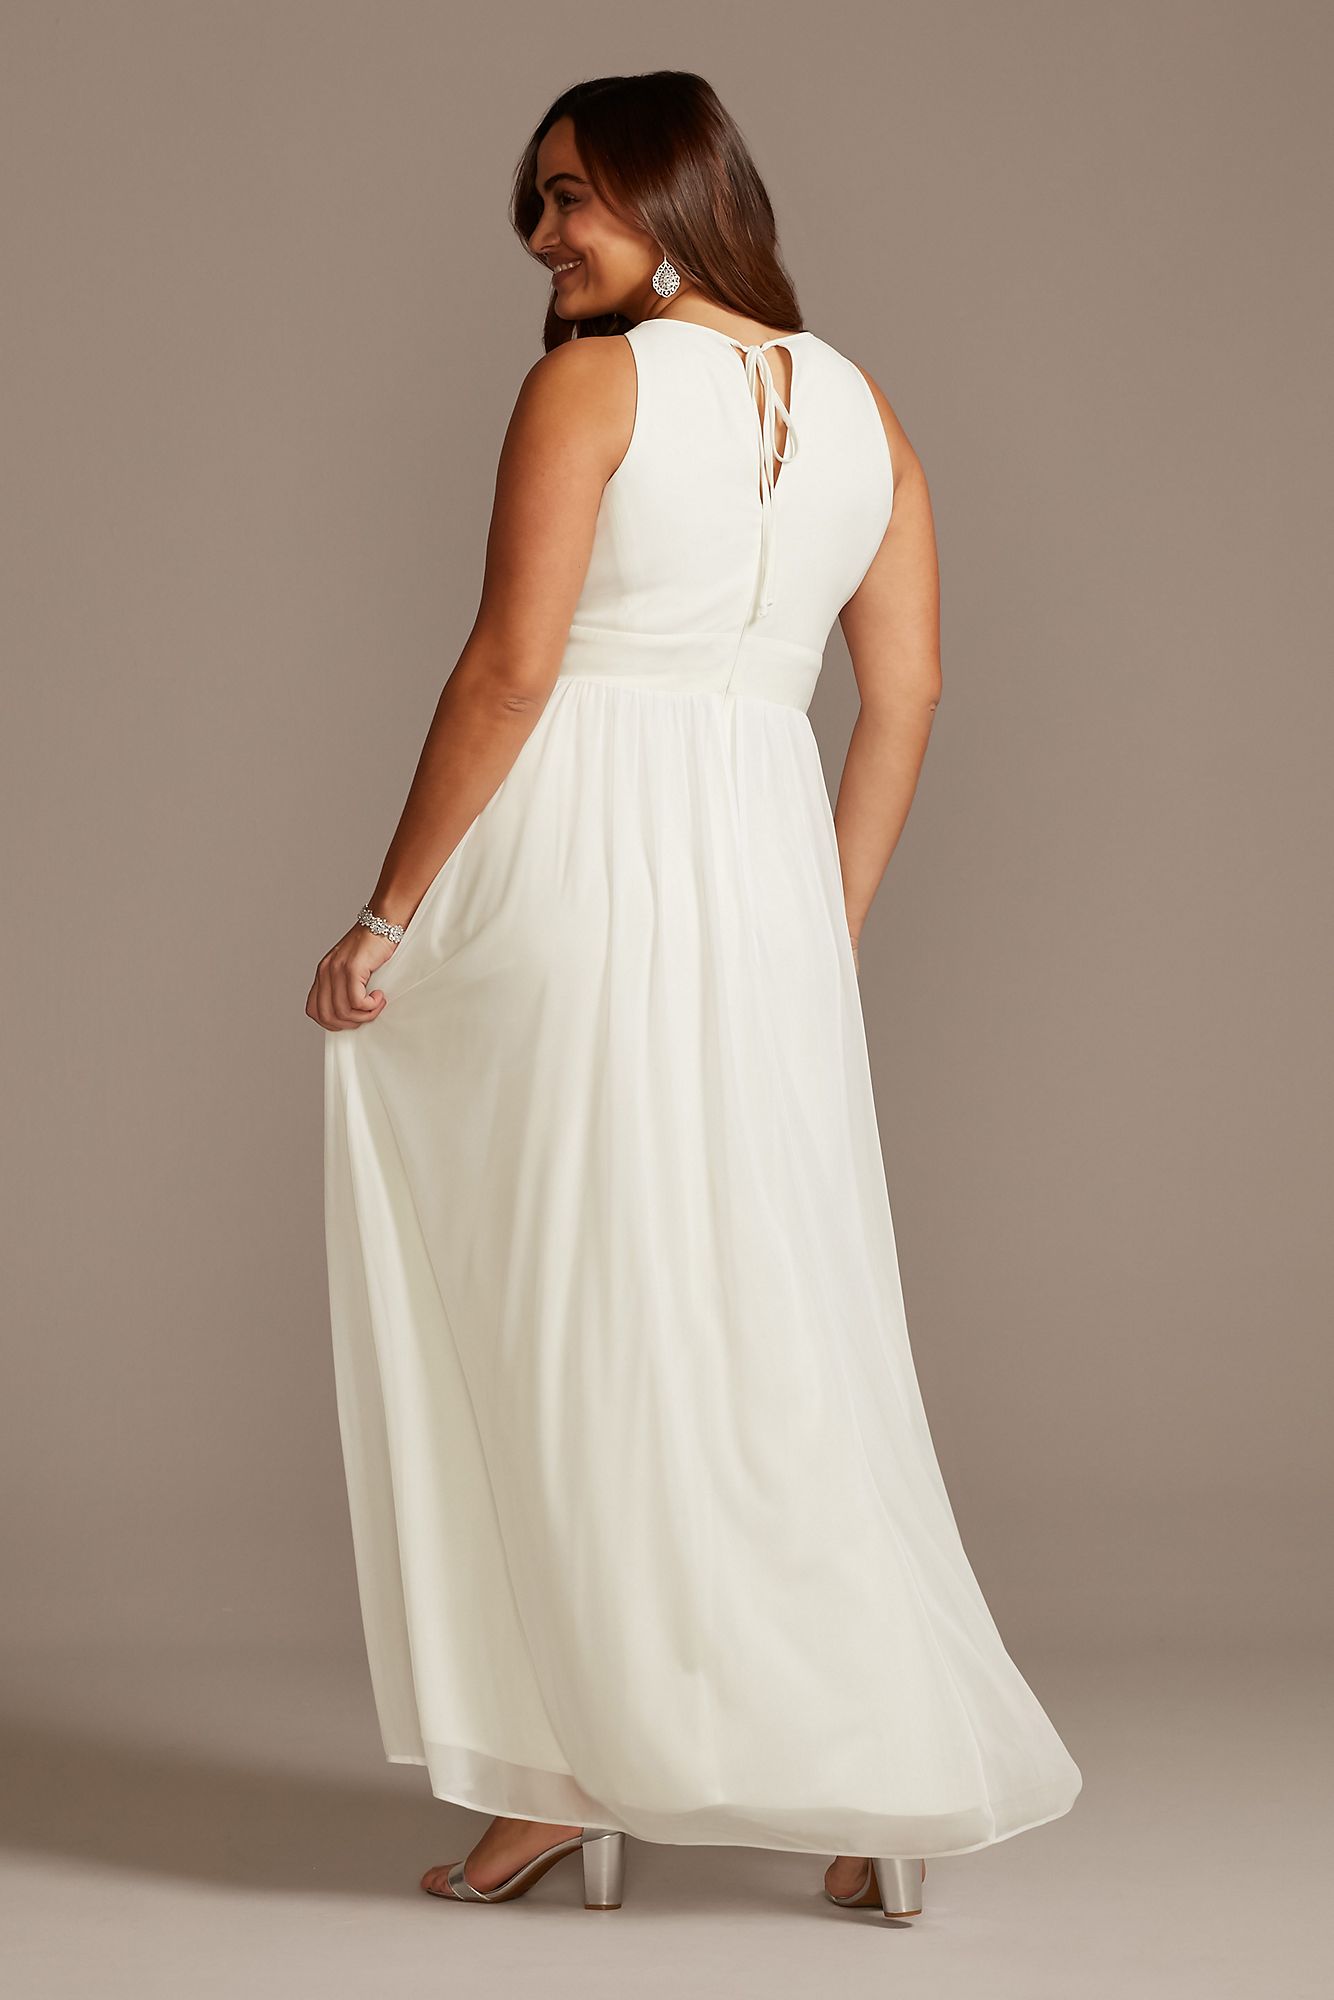 Jersey Keyhole Plus Size Gown with Crystal Waist  5655W